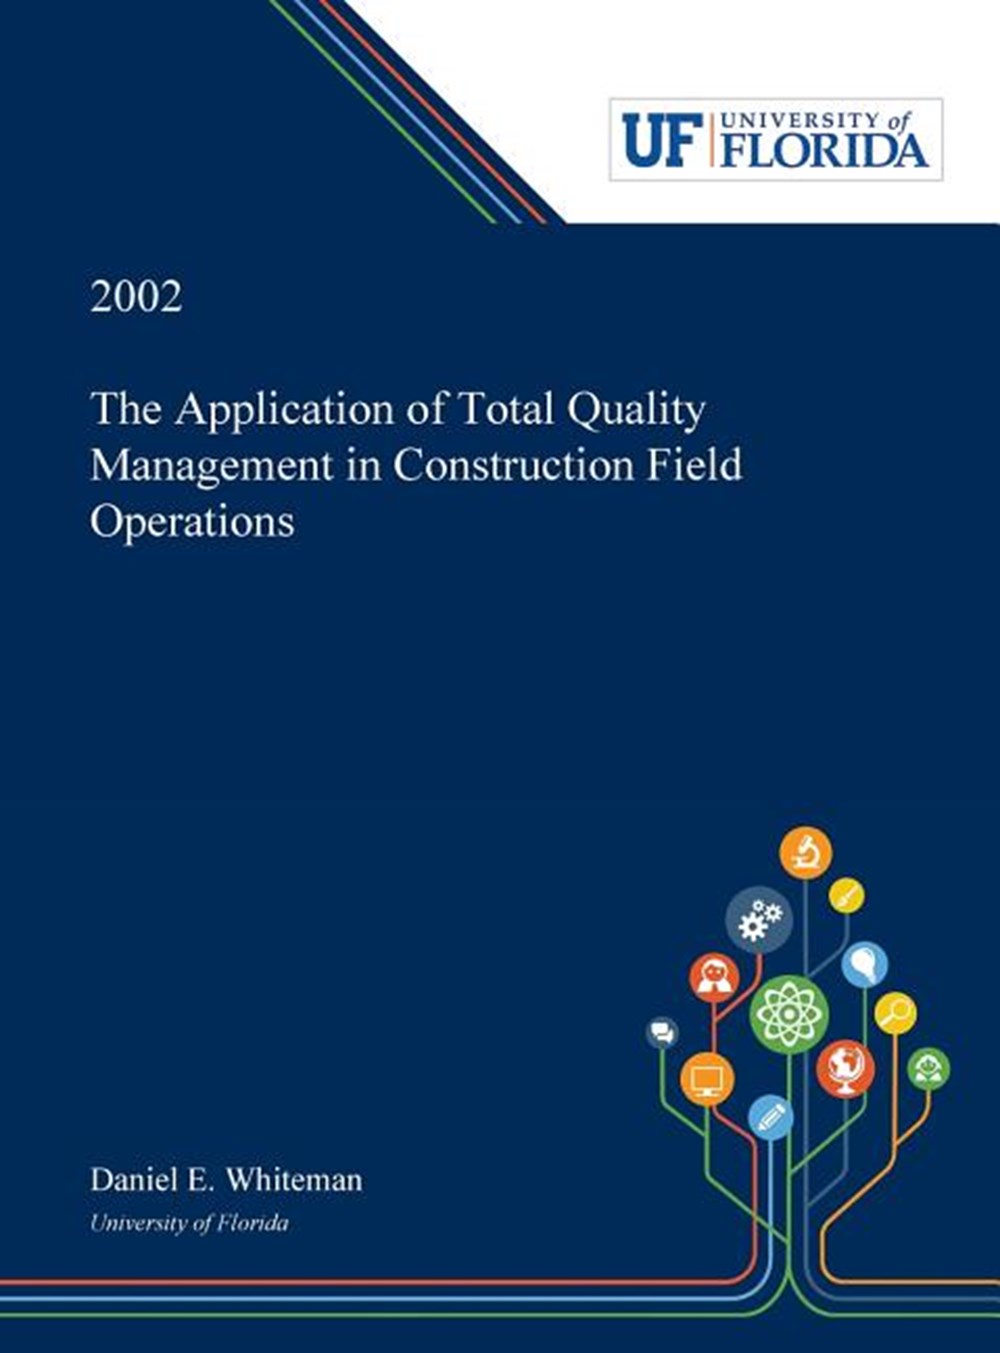 Application of Total Quality Management in Construction Field Operations